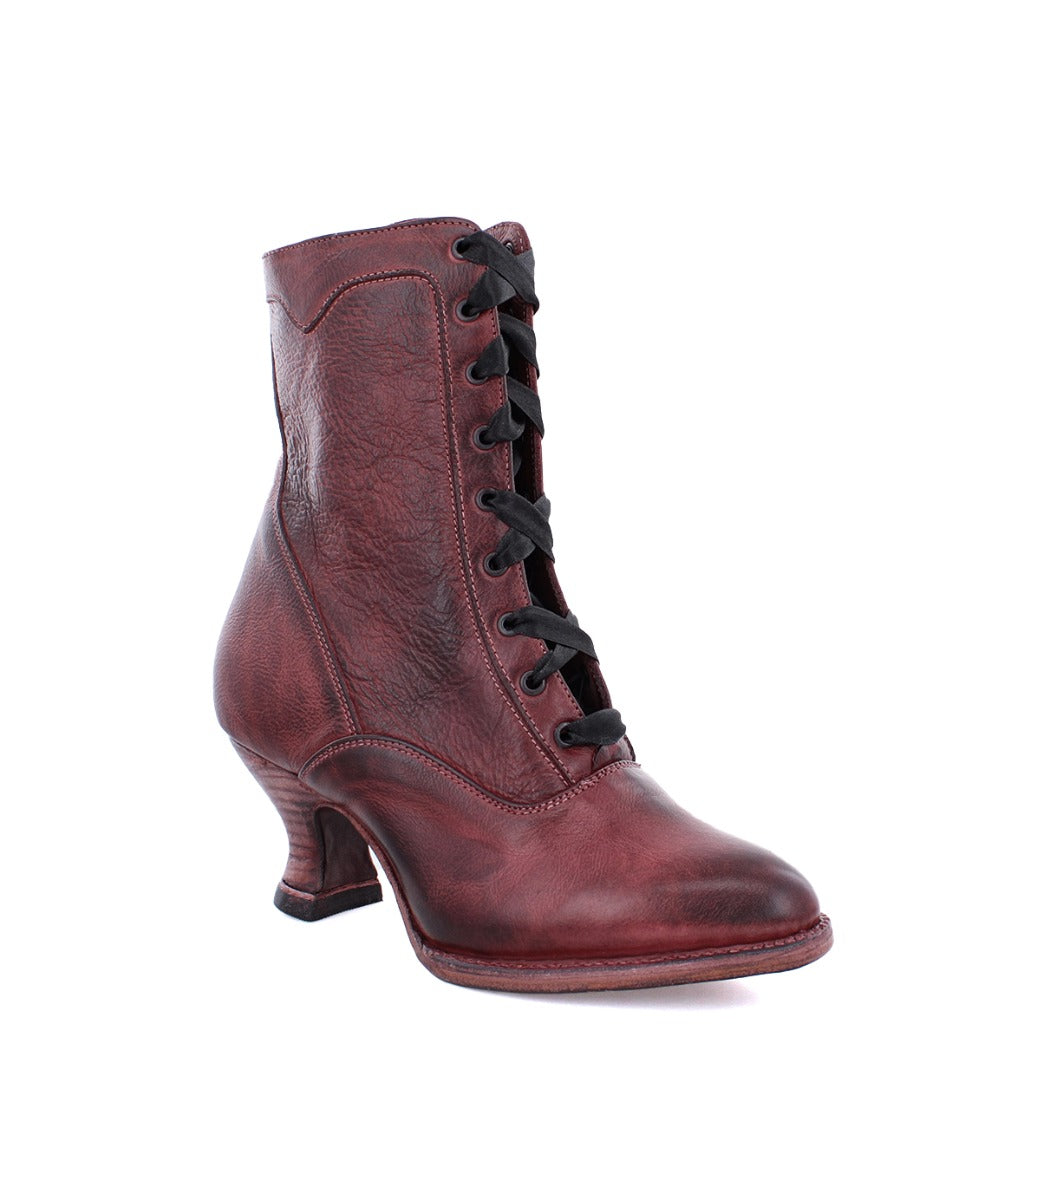 Victorian style burgundy leather ankle boots for women, hand-dyed with uncompromising quality, the Eleanor boots by Oak Tree Farms.